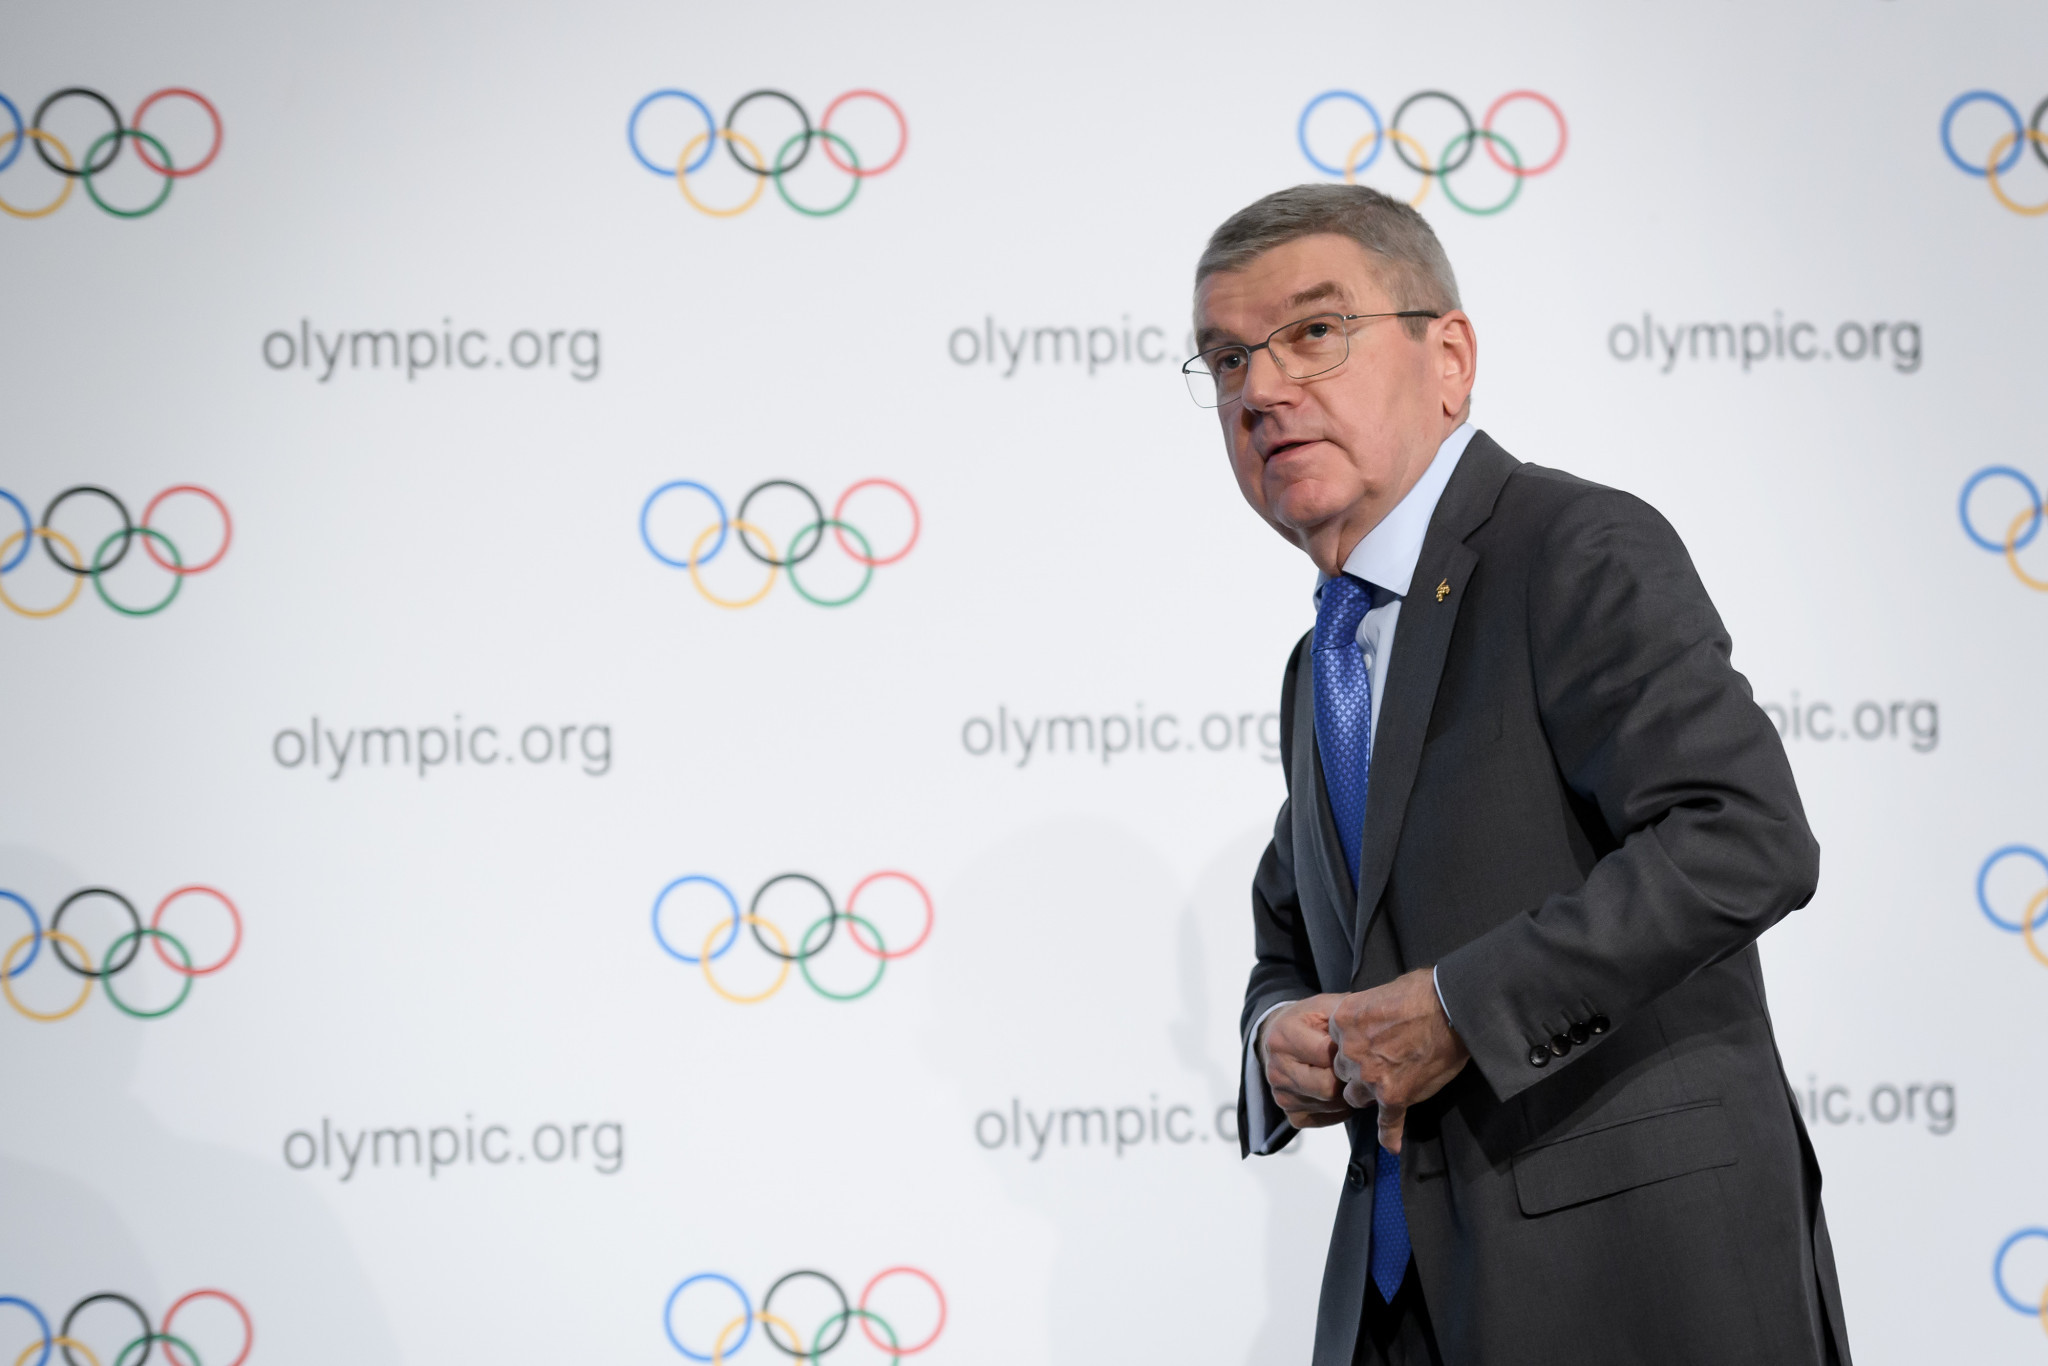 IOC President Thomas Bach has previously seemed confident about a German bid for the Olympic and Paralympic Games ©Getty Images